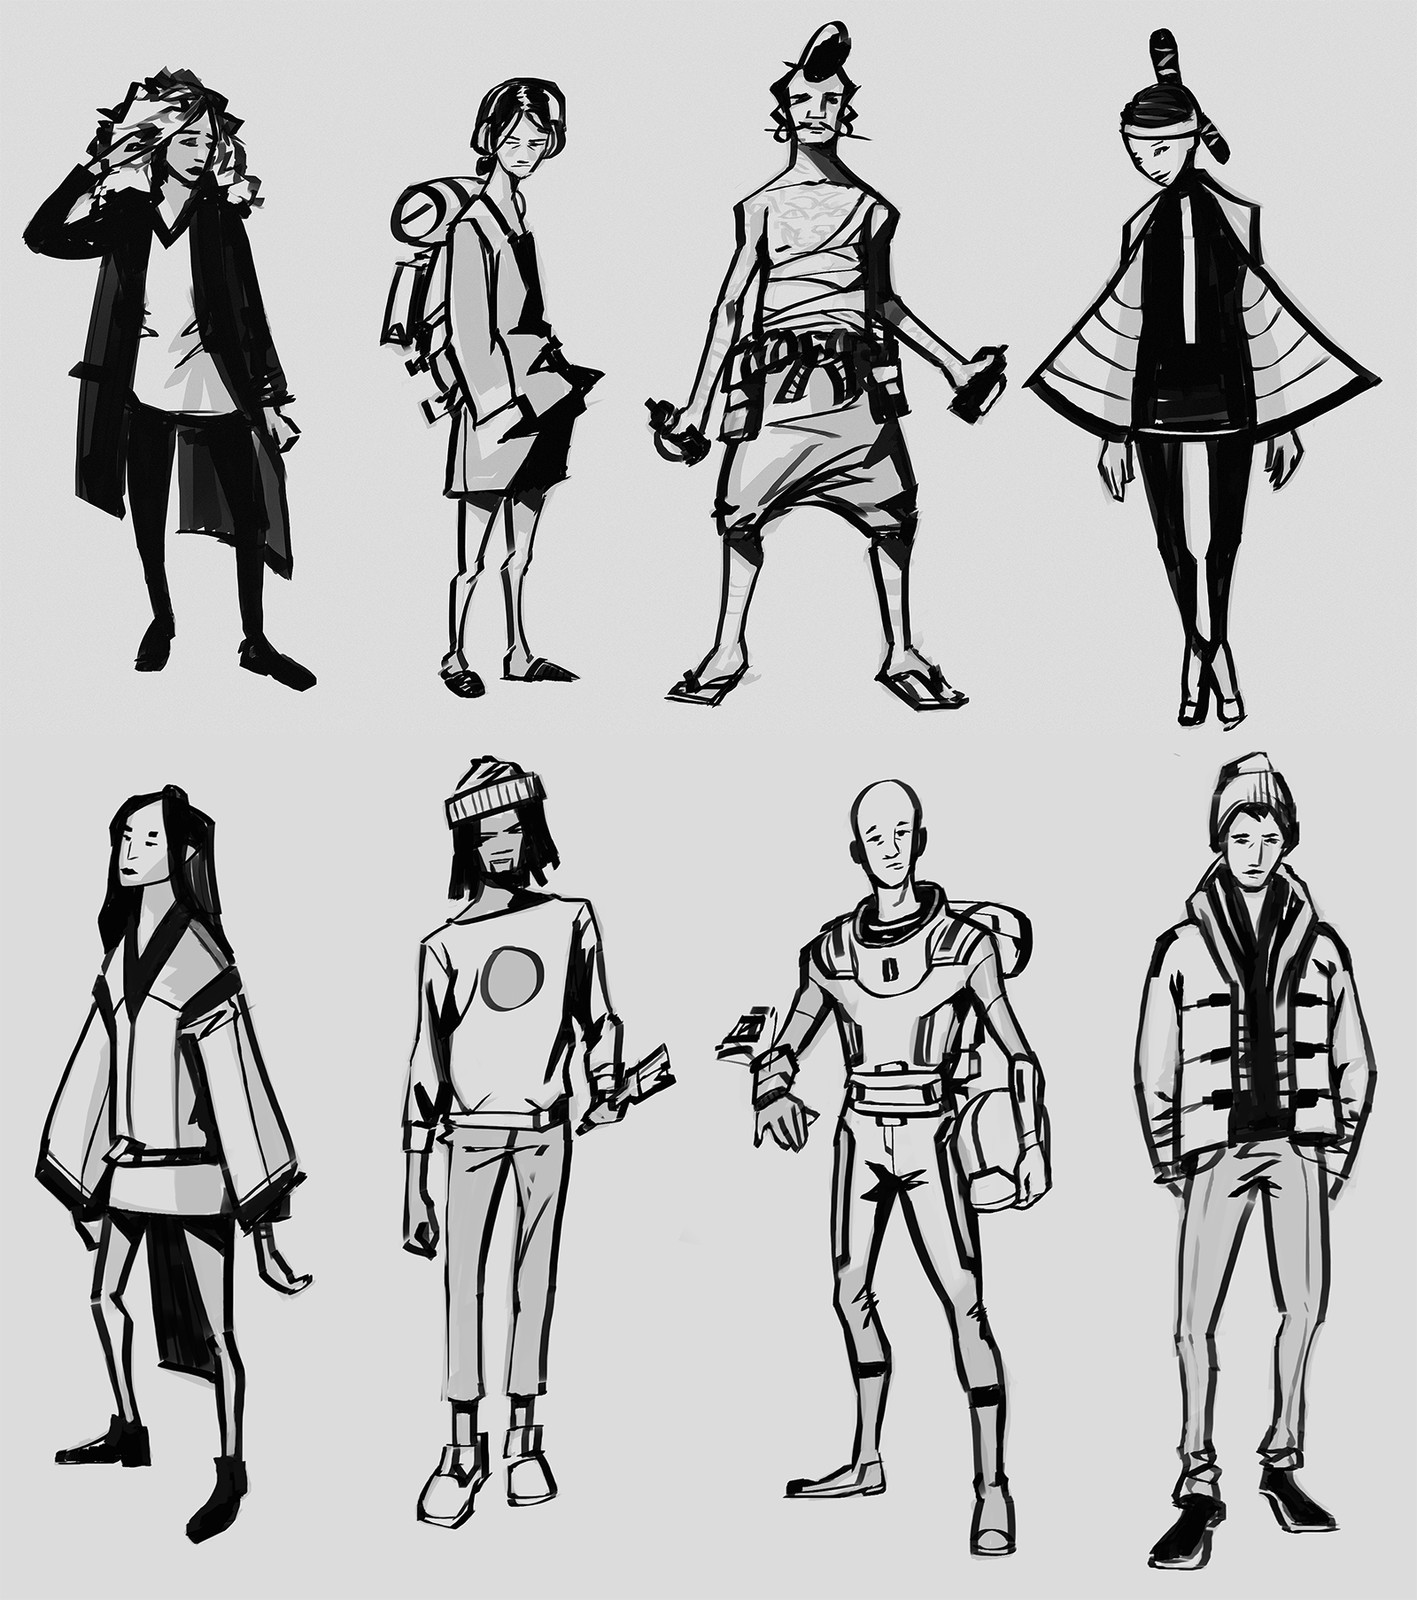 Avatar sketches for Project Canterbury.